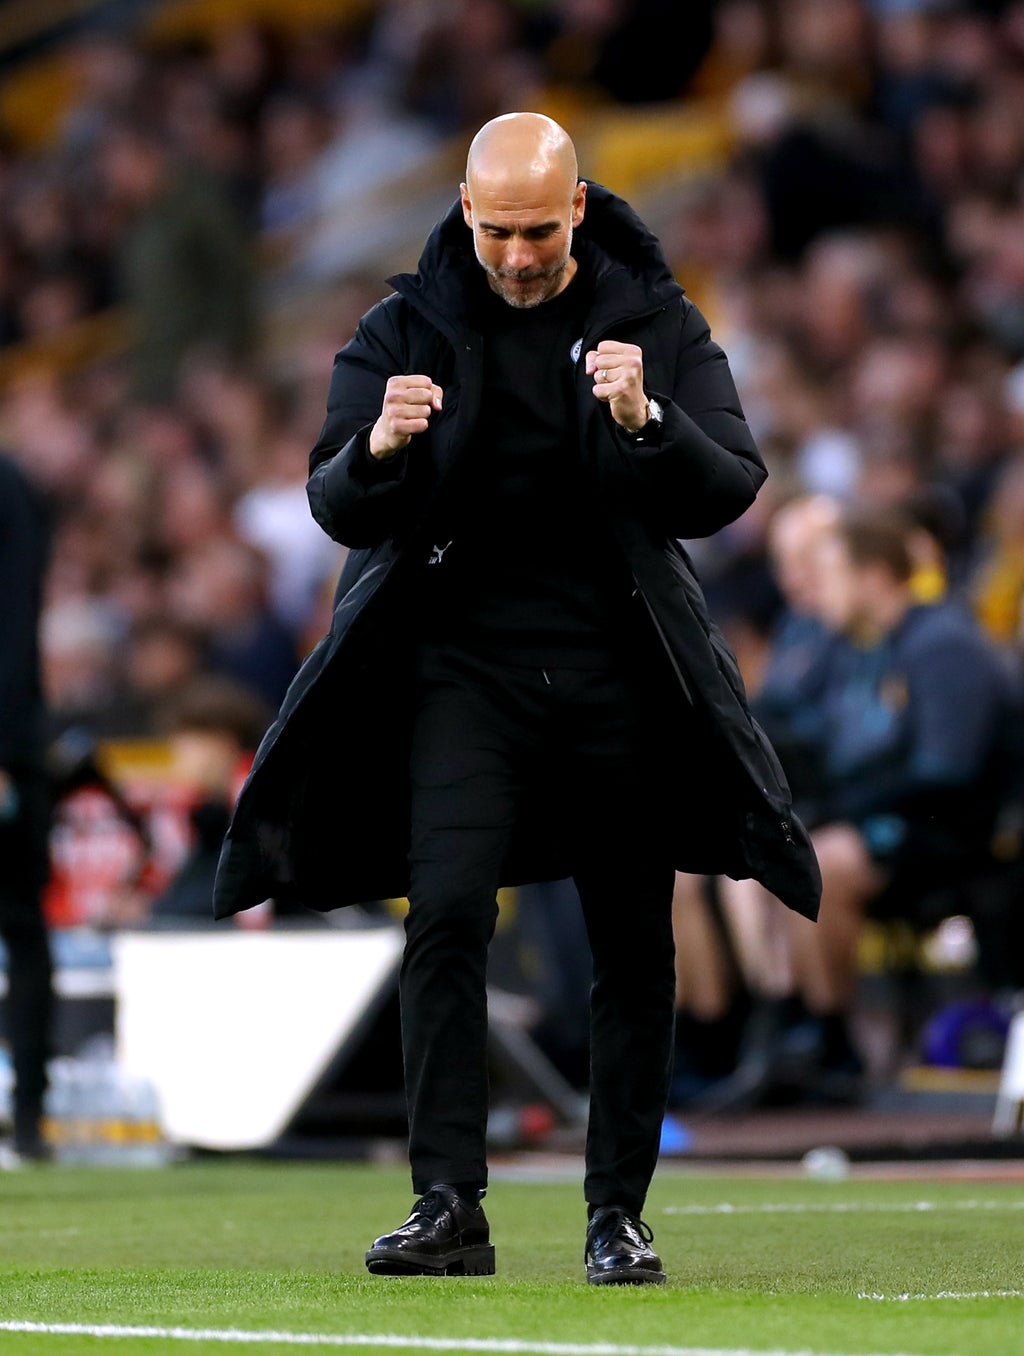 Pep Guardiola invites United fans to don Man City shirts ahead of title decider